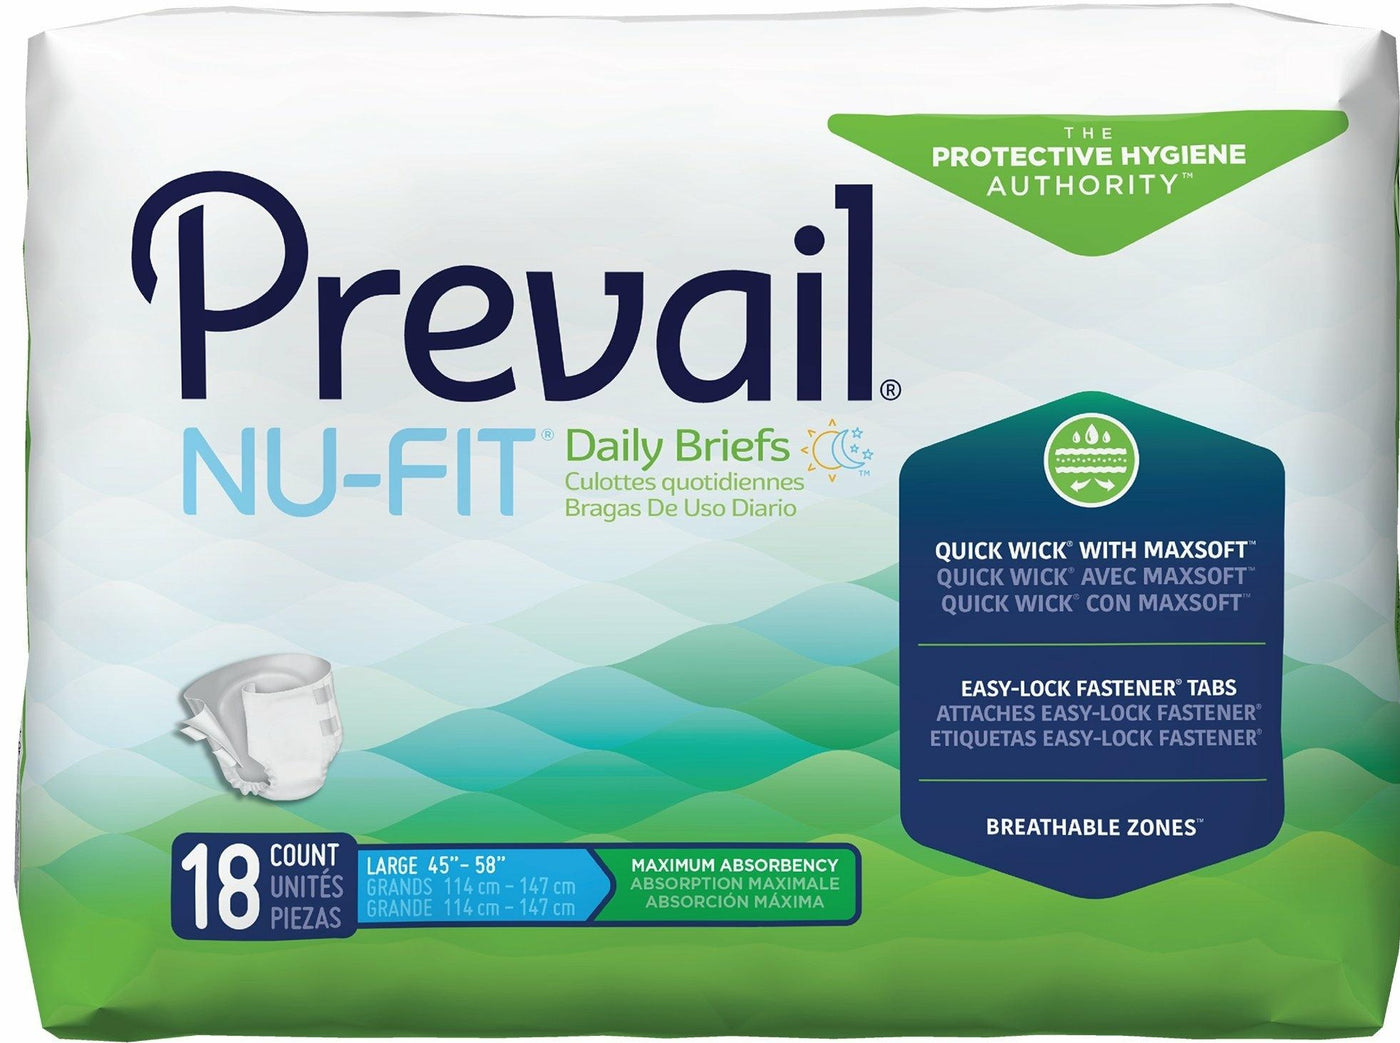 Prevail Adult Daily Disposable Underwear, Extra Absorbency – Save